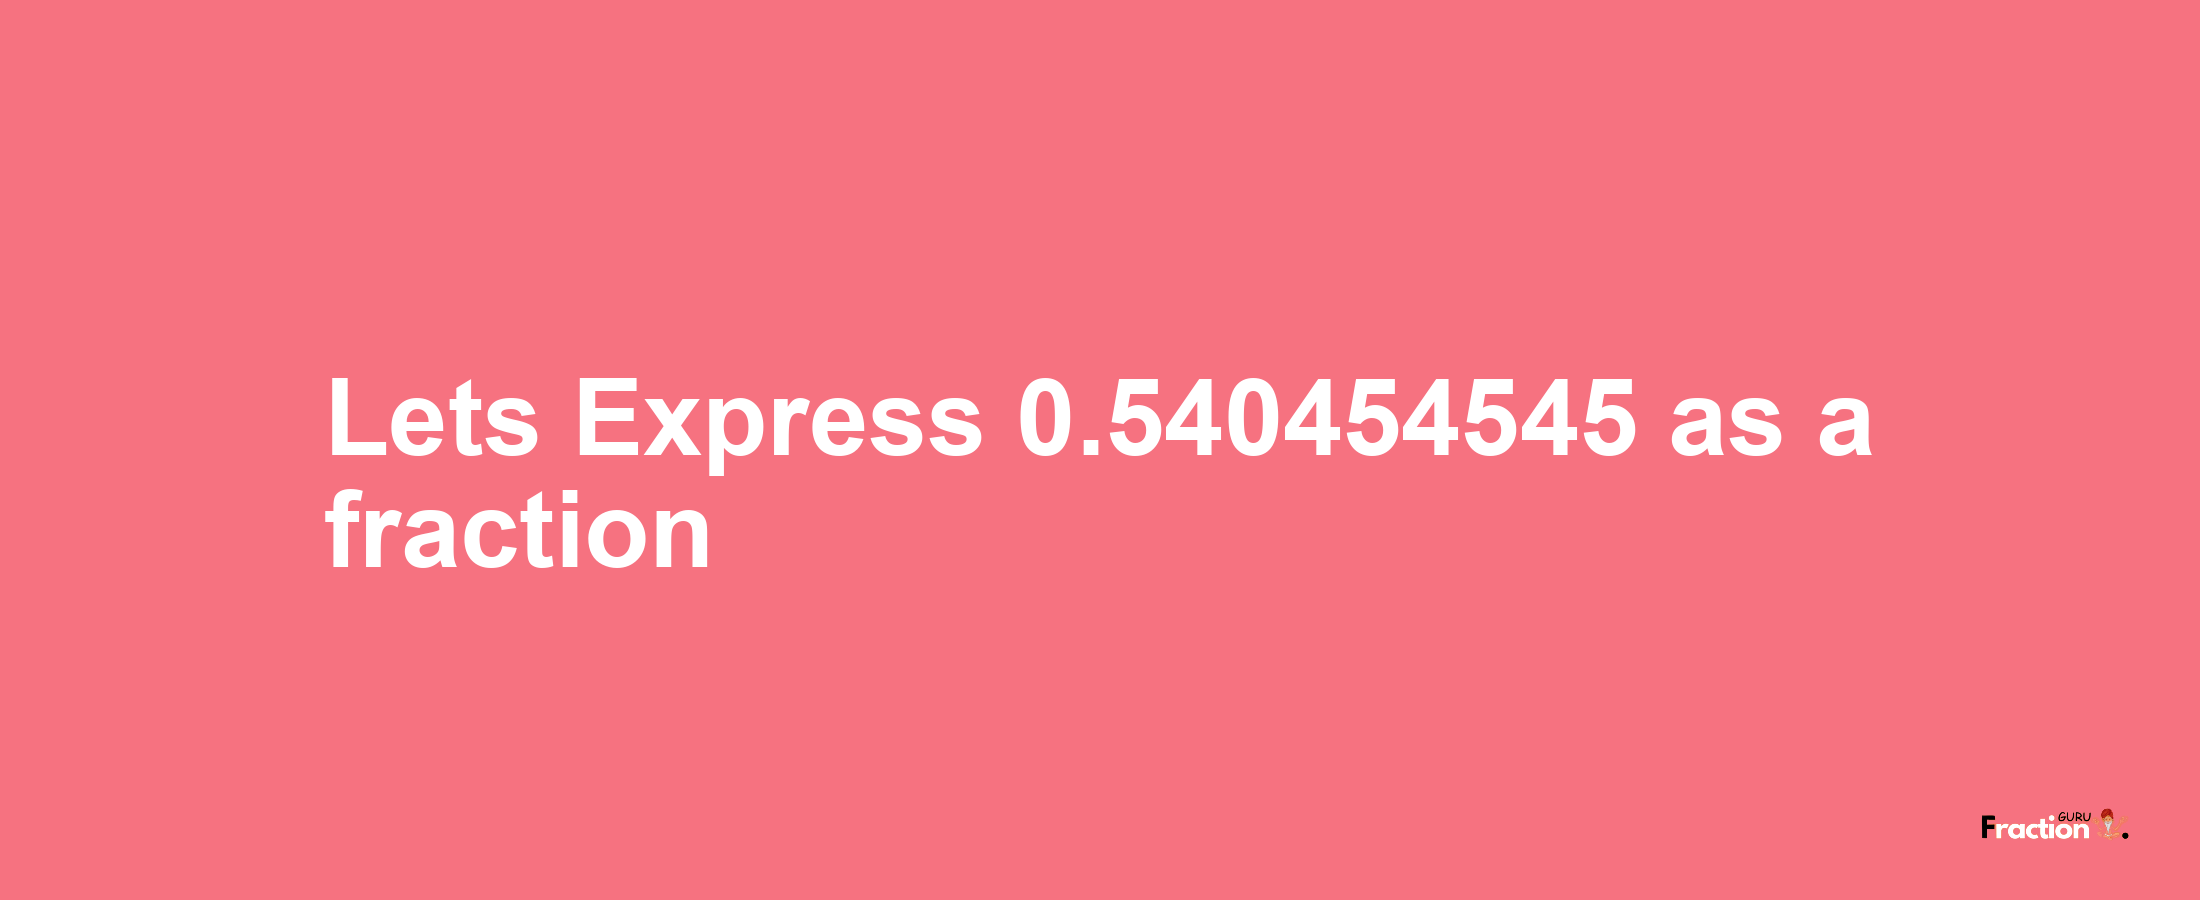 Lets Express 0.540454545 as afraction